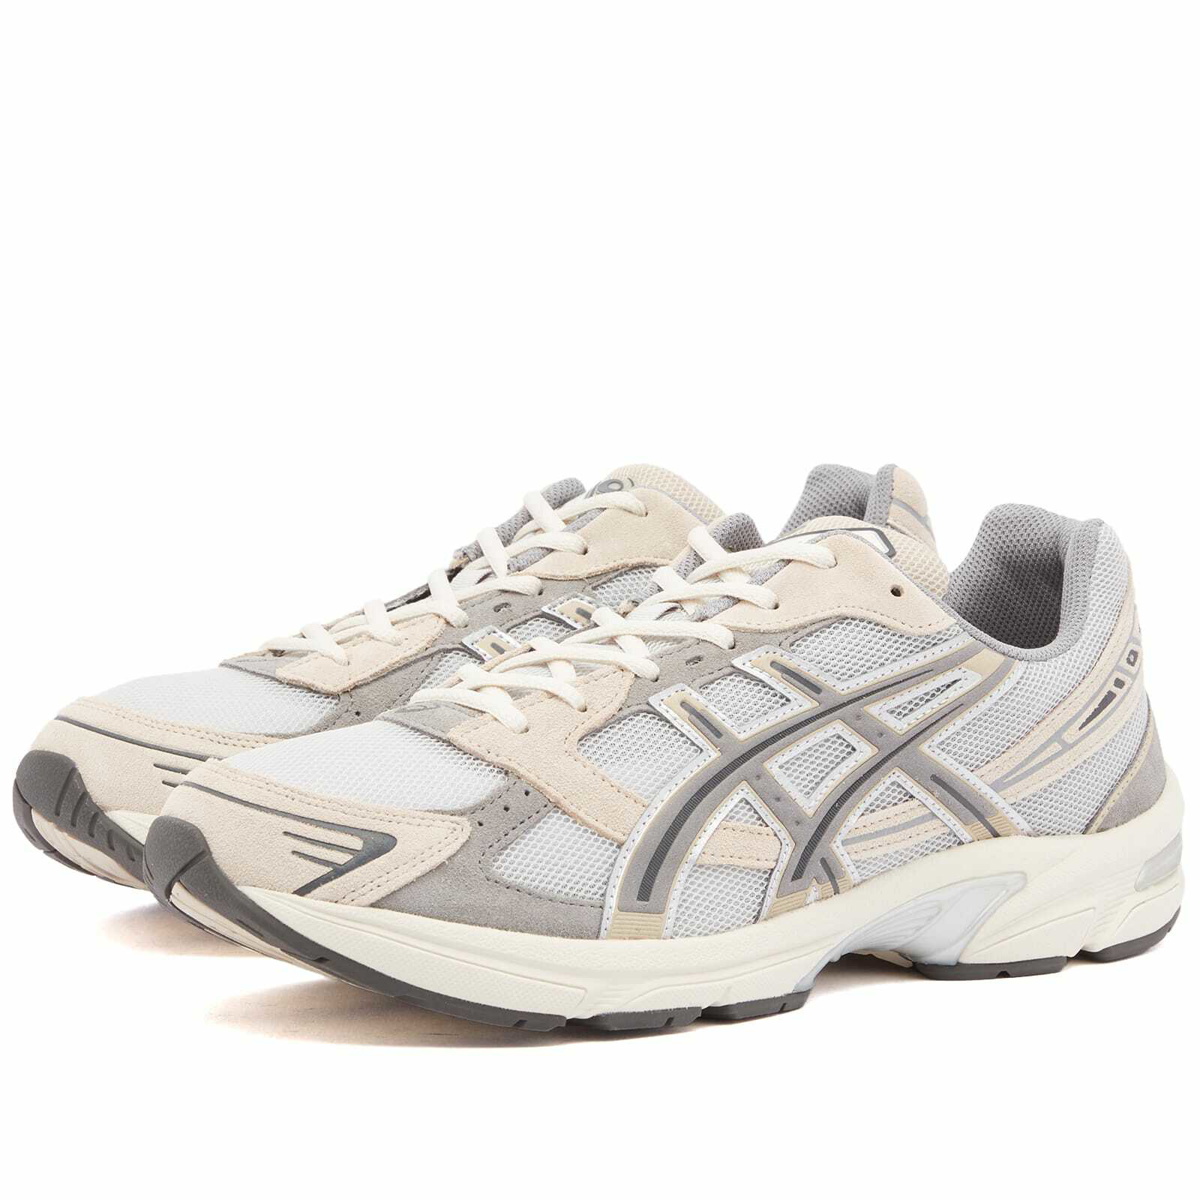 Asics Gel-1130 Sneakers in Oyster Grey/Clay Grey ASICS